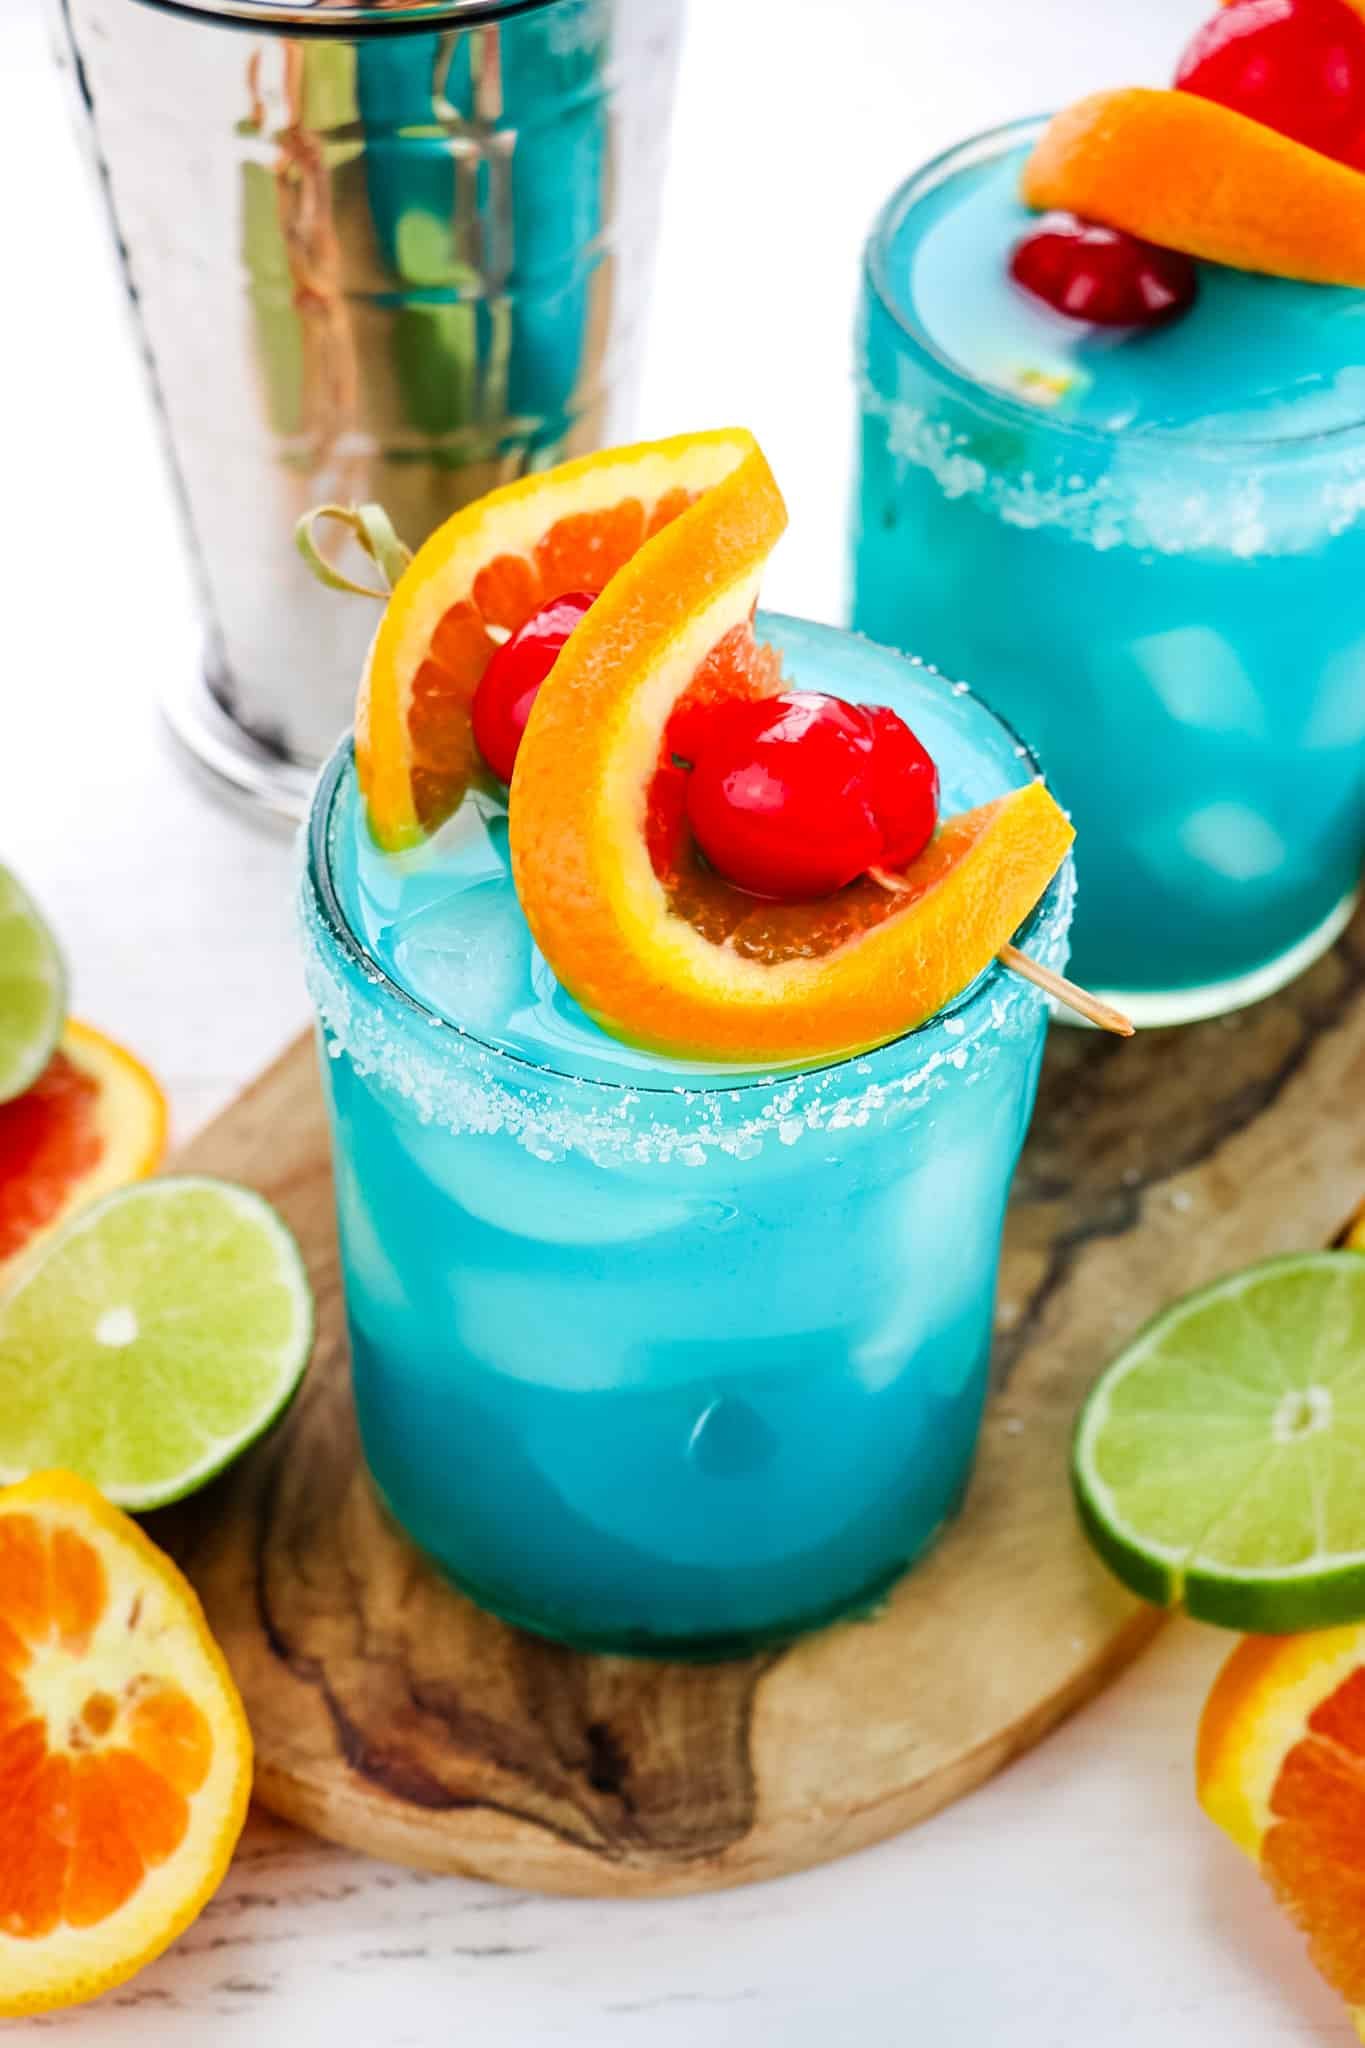 Blue margaritas topped with orange slice and cherry garnished with salt on the rims of the glasses.